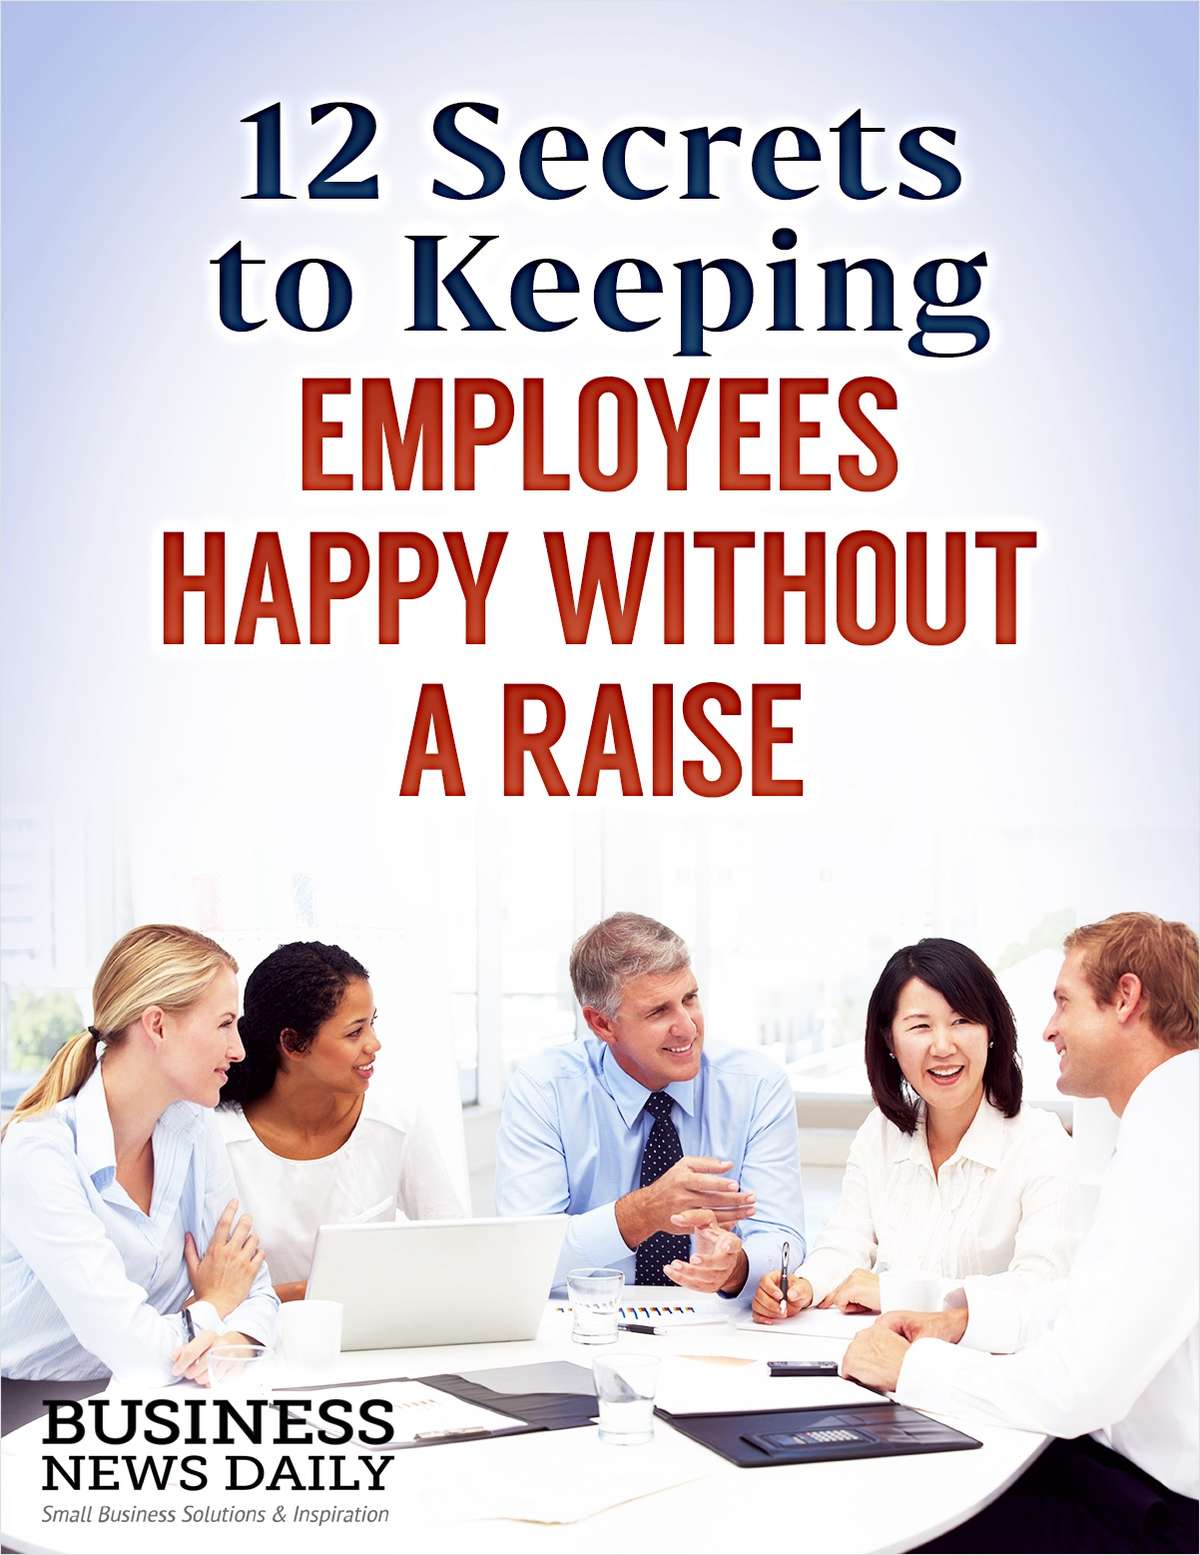 12 Secrets to Keeping Employees Happy Without a Raise